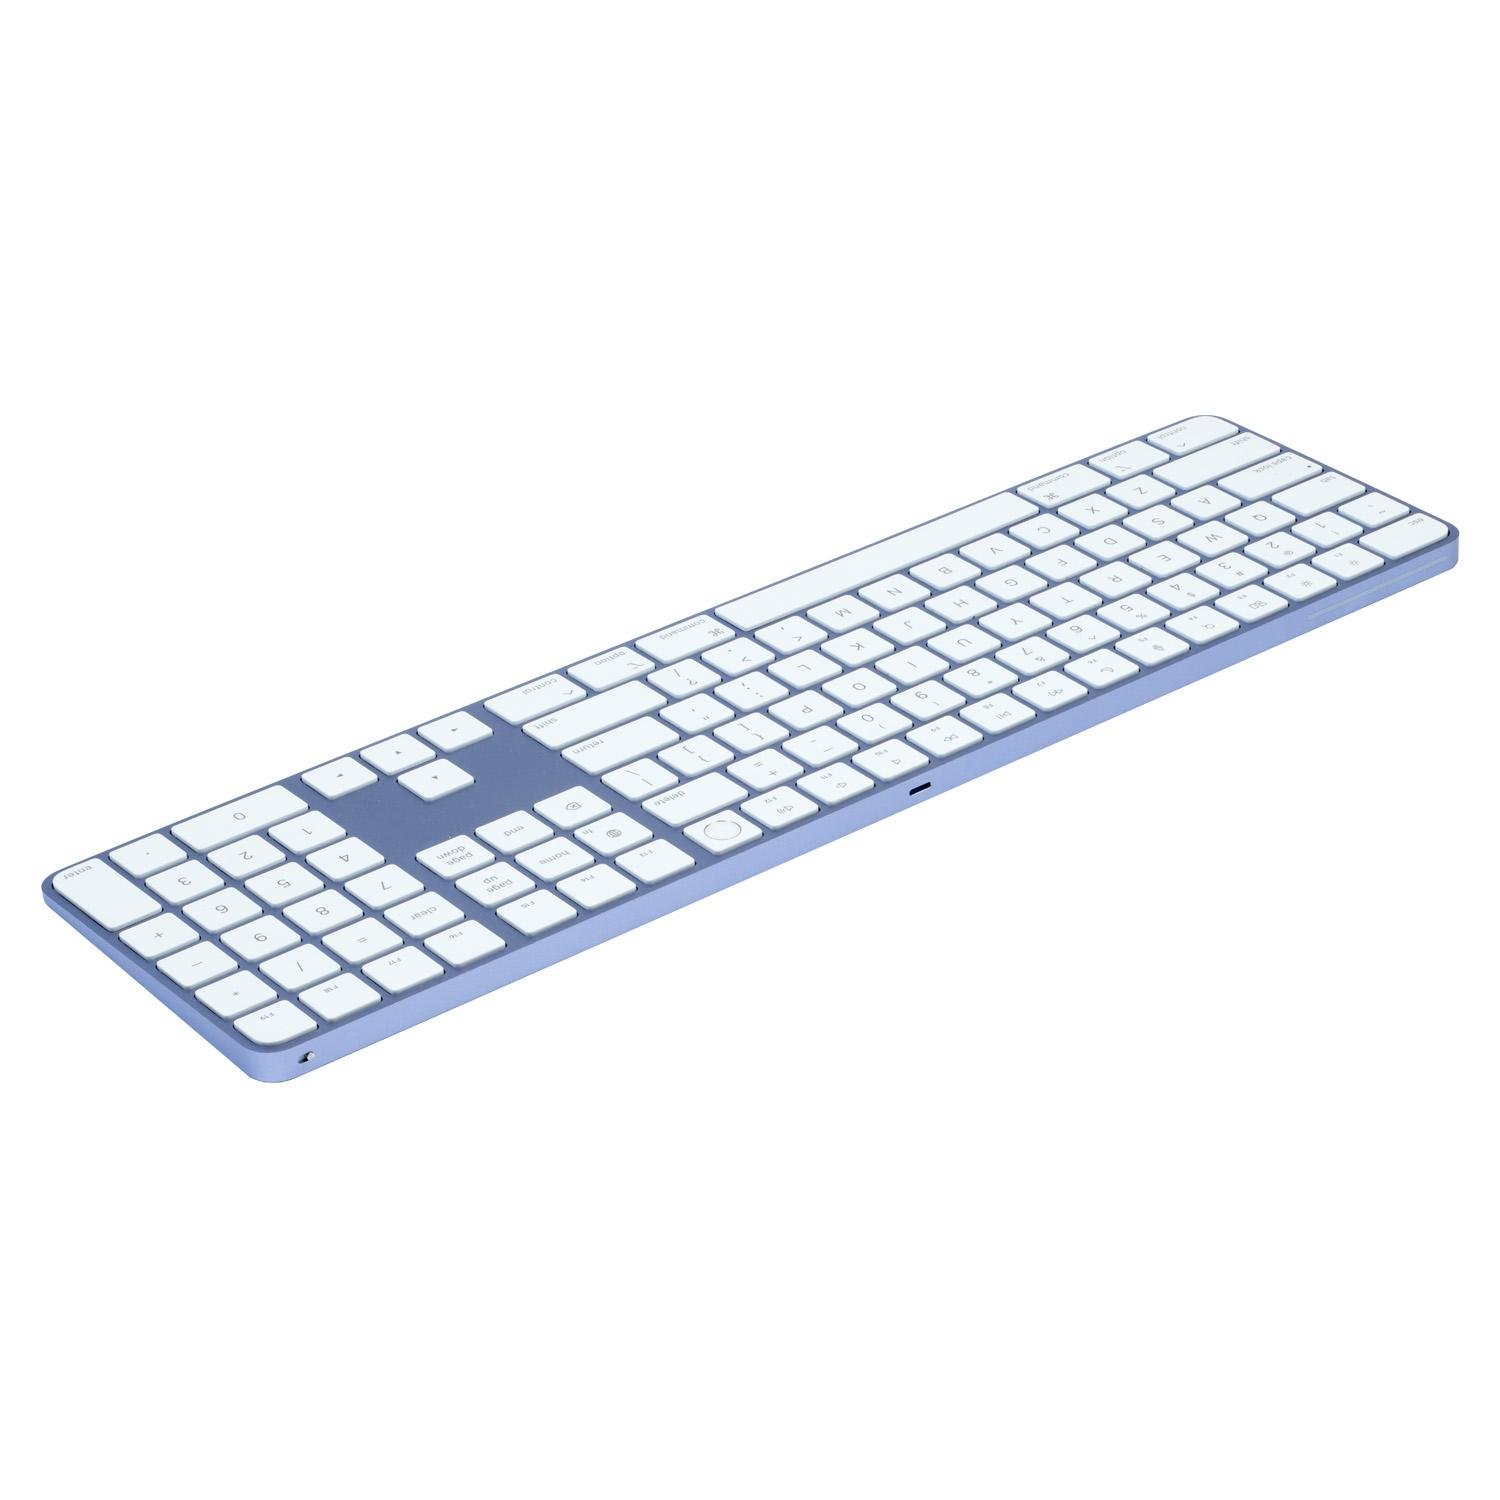 Magic Keyboard with Touch ID and Numeric Keypad for Mac models